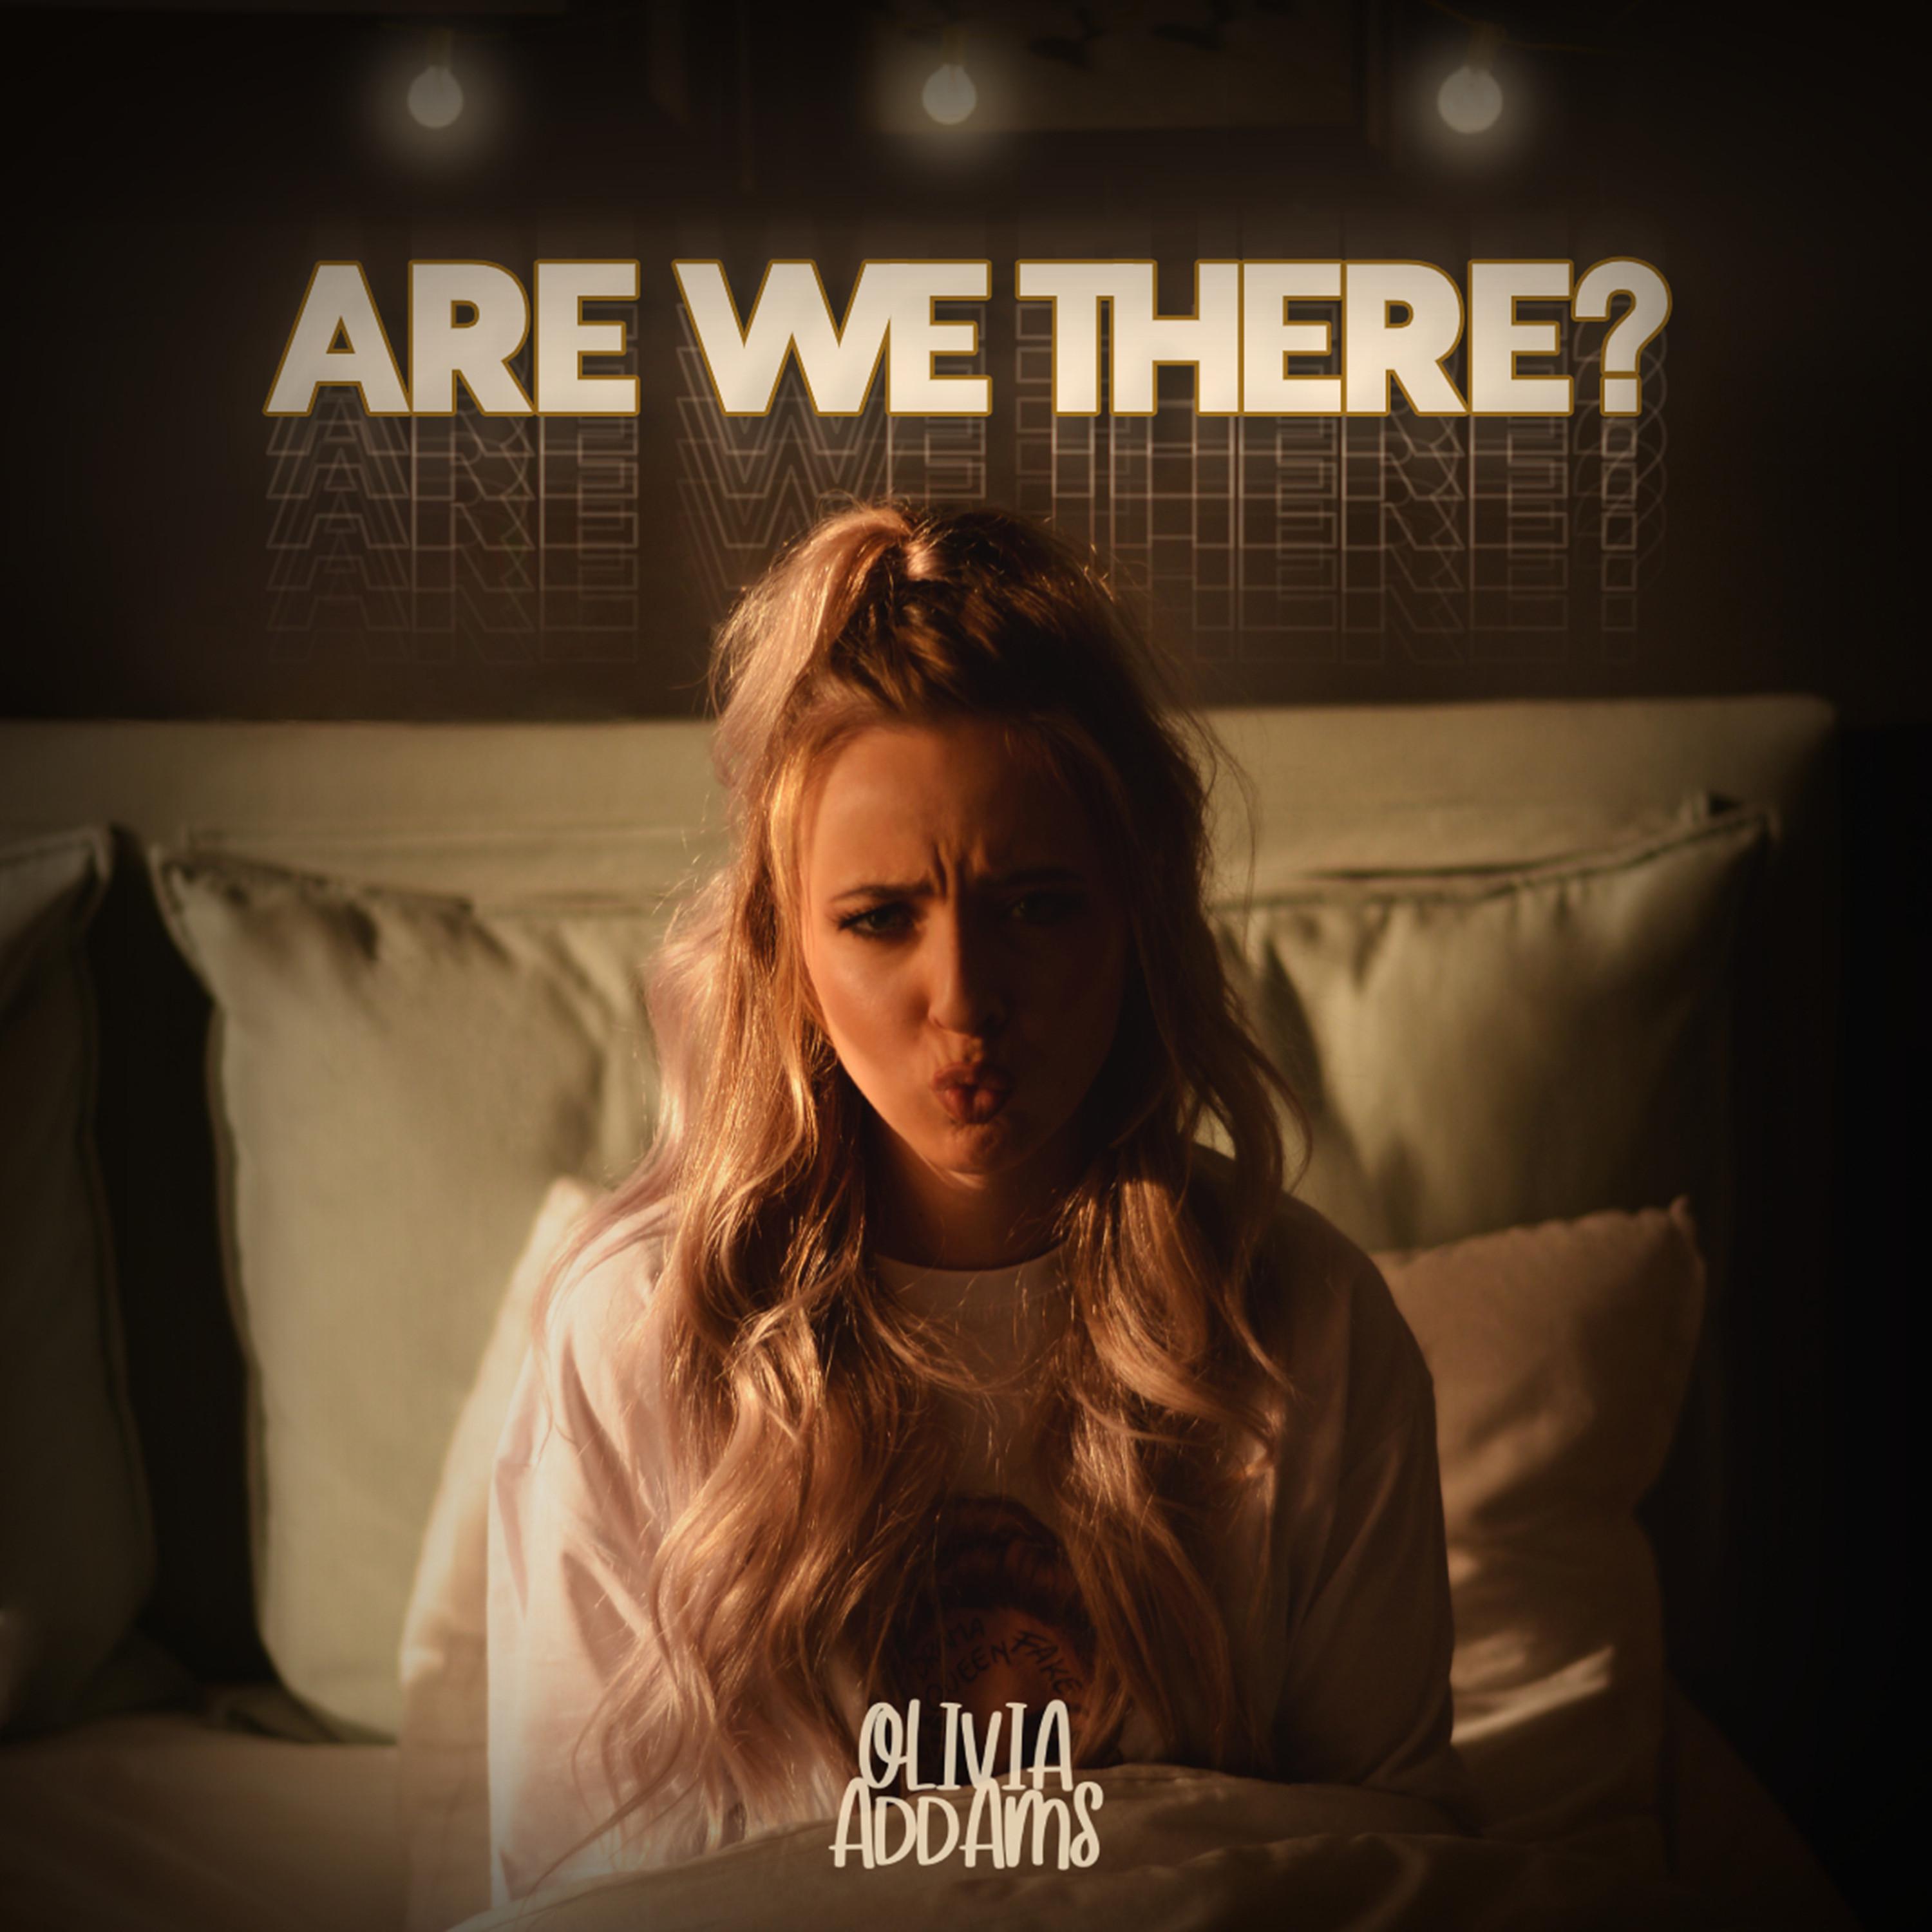 Olivia Addams - Are We There？ (Instrumental cu backing)